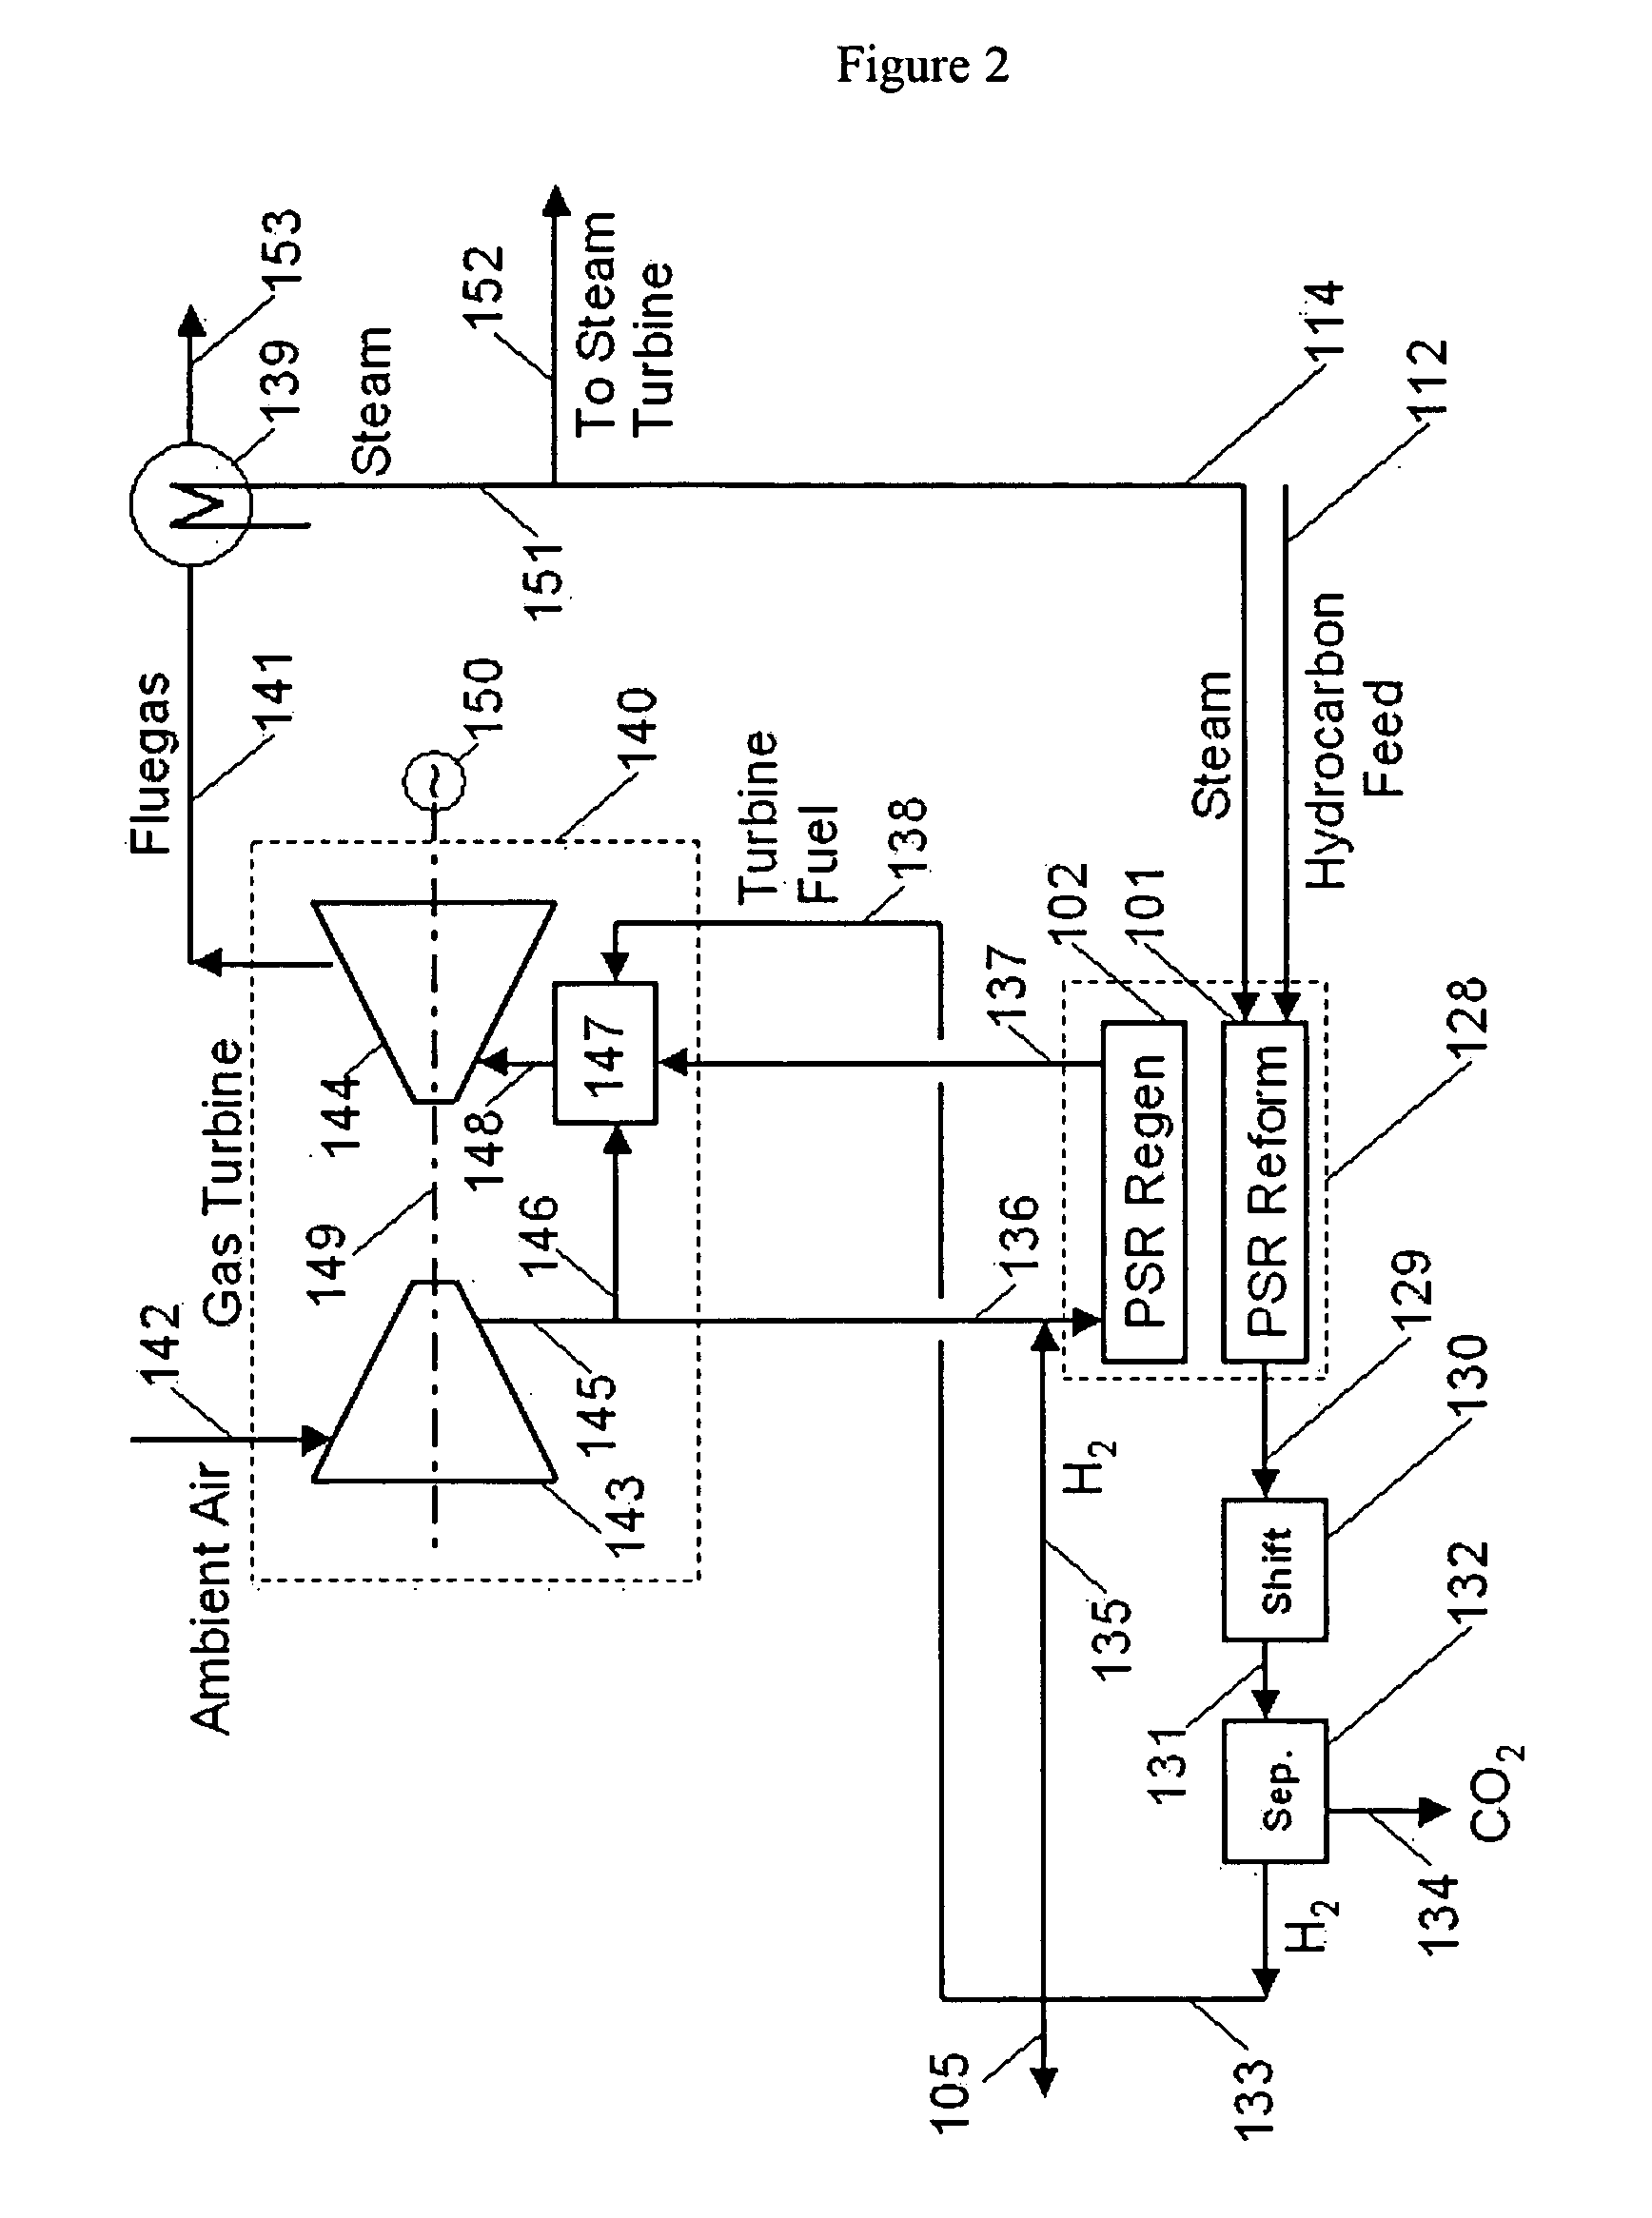 Integration of hydrogen and power generation using pressure swing reforming